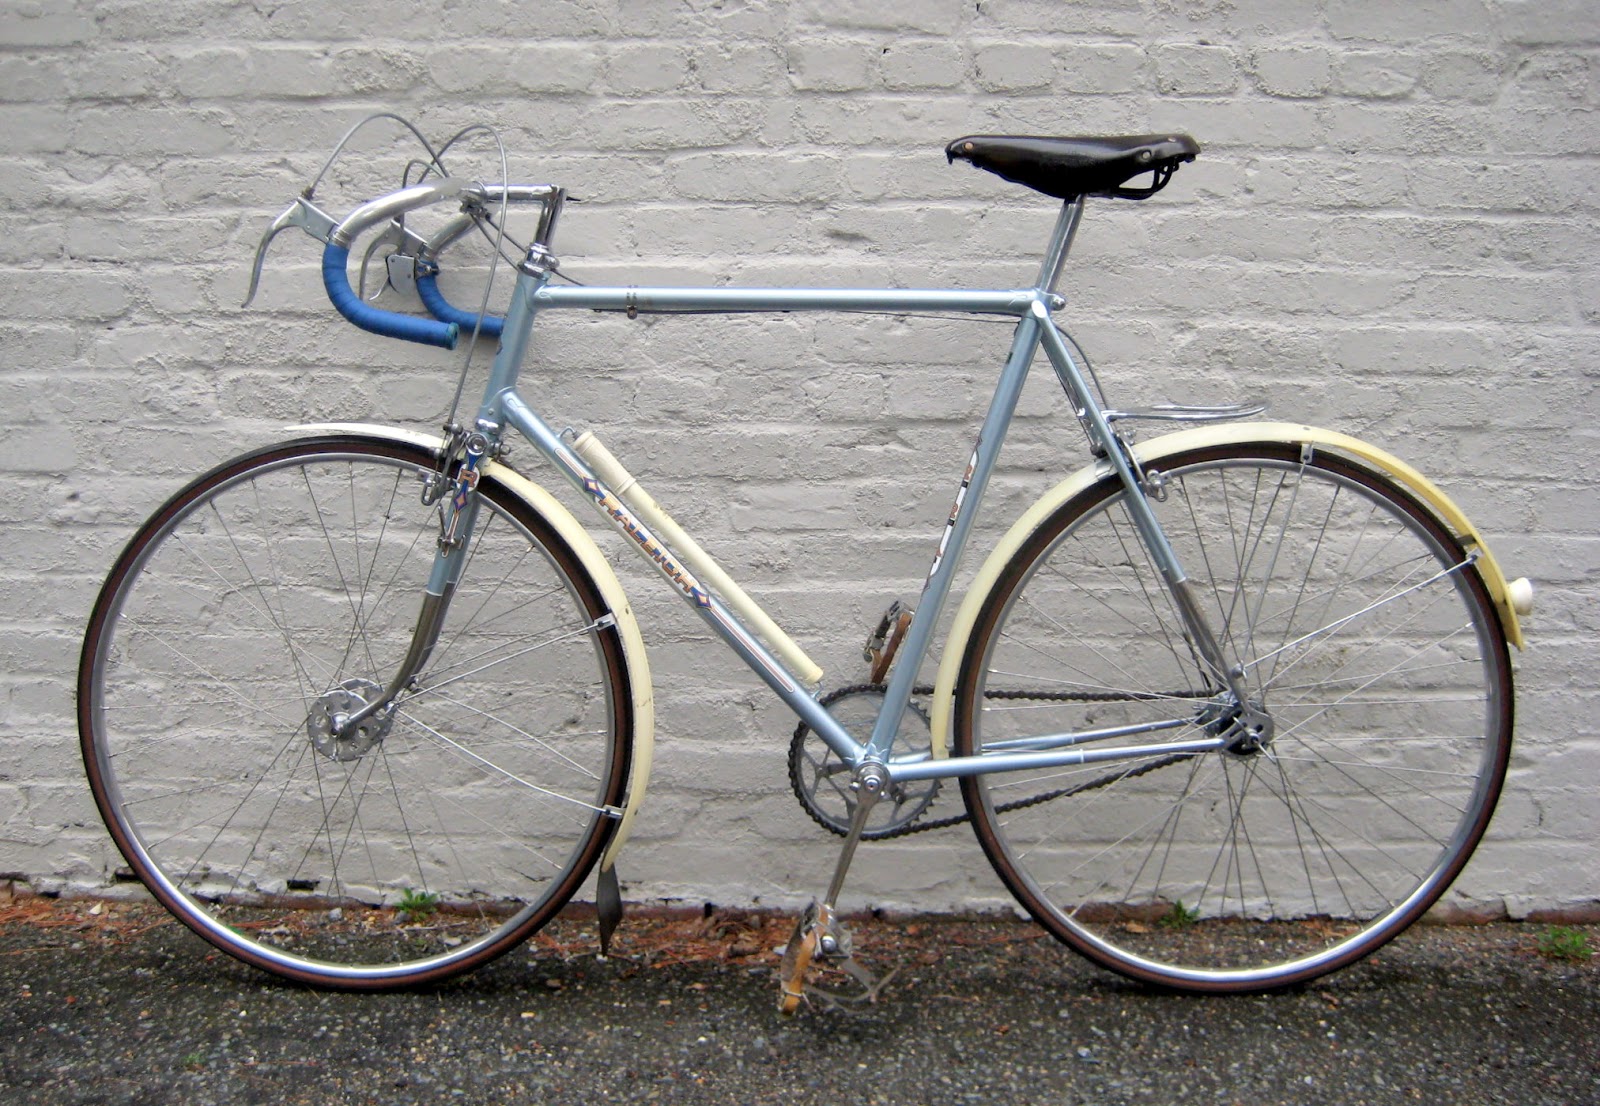 ON THE DROPS: Raleigh Record Ace (RRA) 1947-1954